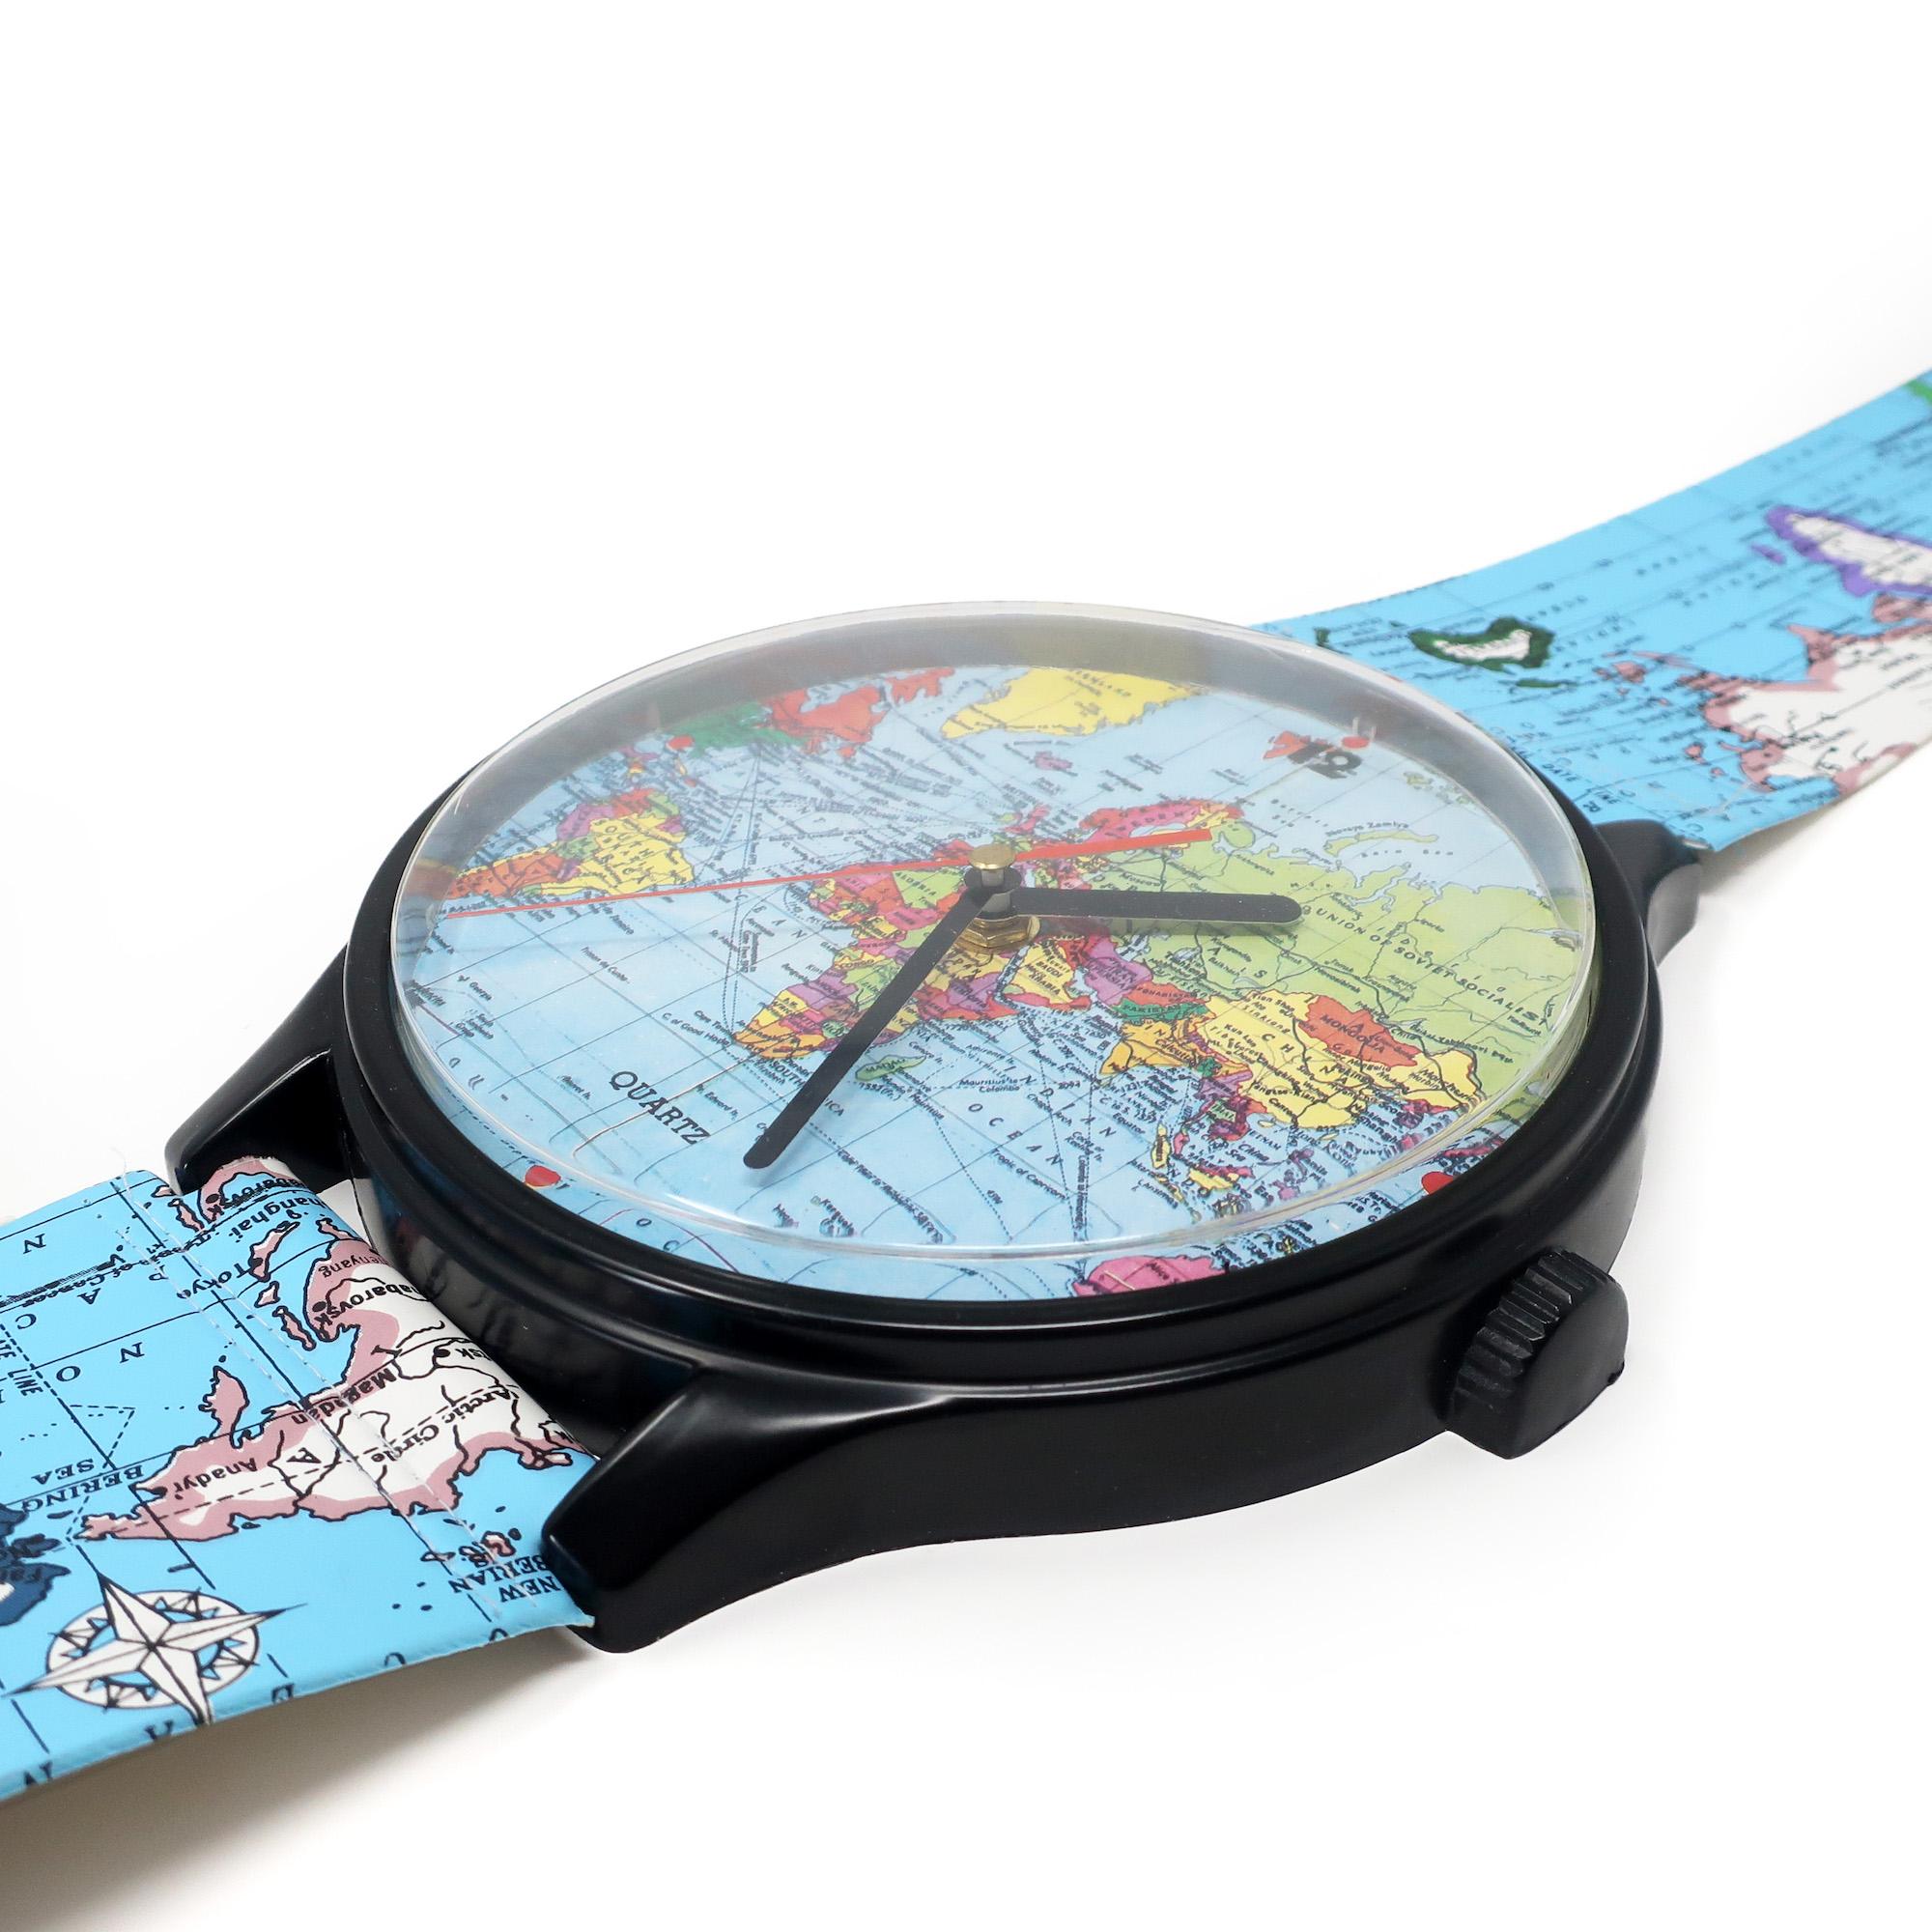 A vintage world map wrist watch shaped wall clock from the 1980s. Looks exactly like a wrist watch blown up to fit a giant's wrist! Just under four feet tall, this amazing clock has oversized bands, buckle, and face, all printed with a world map